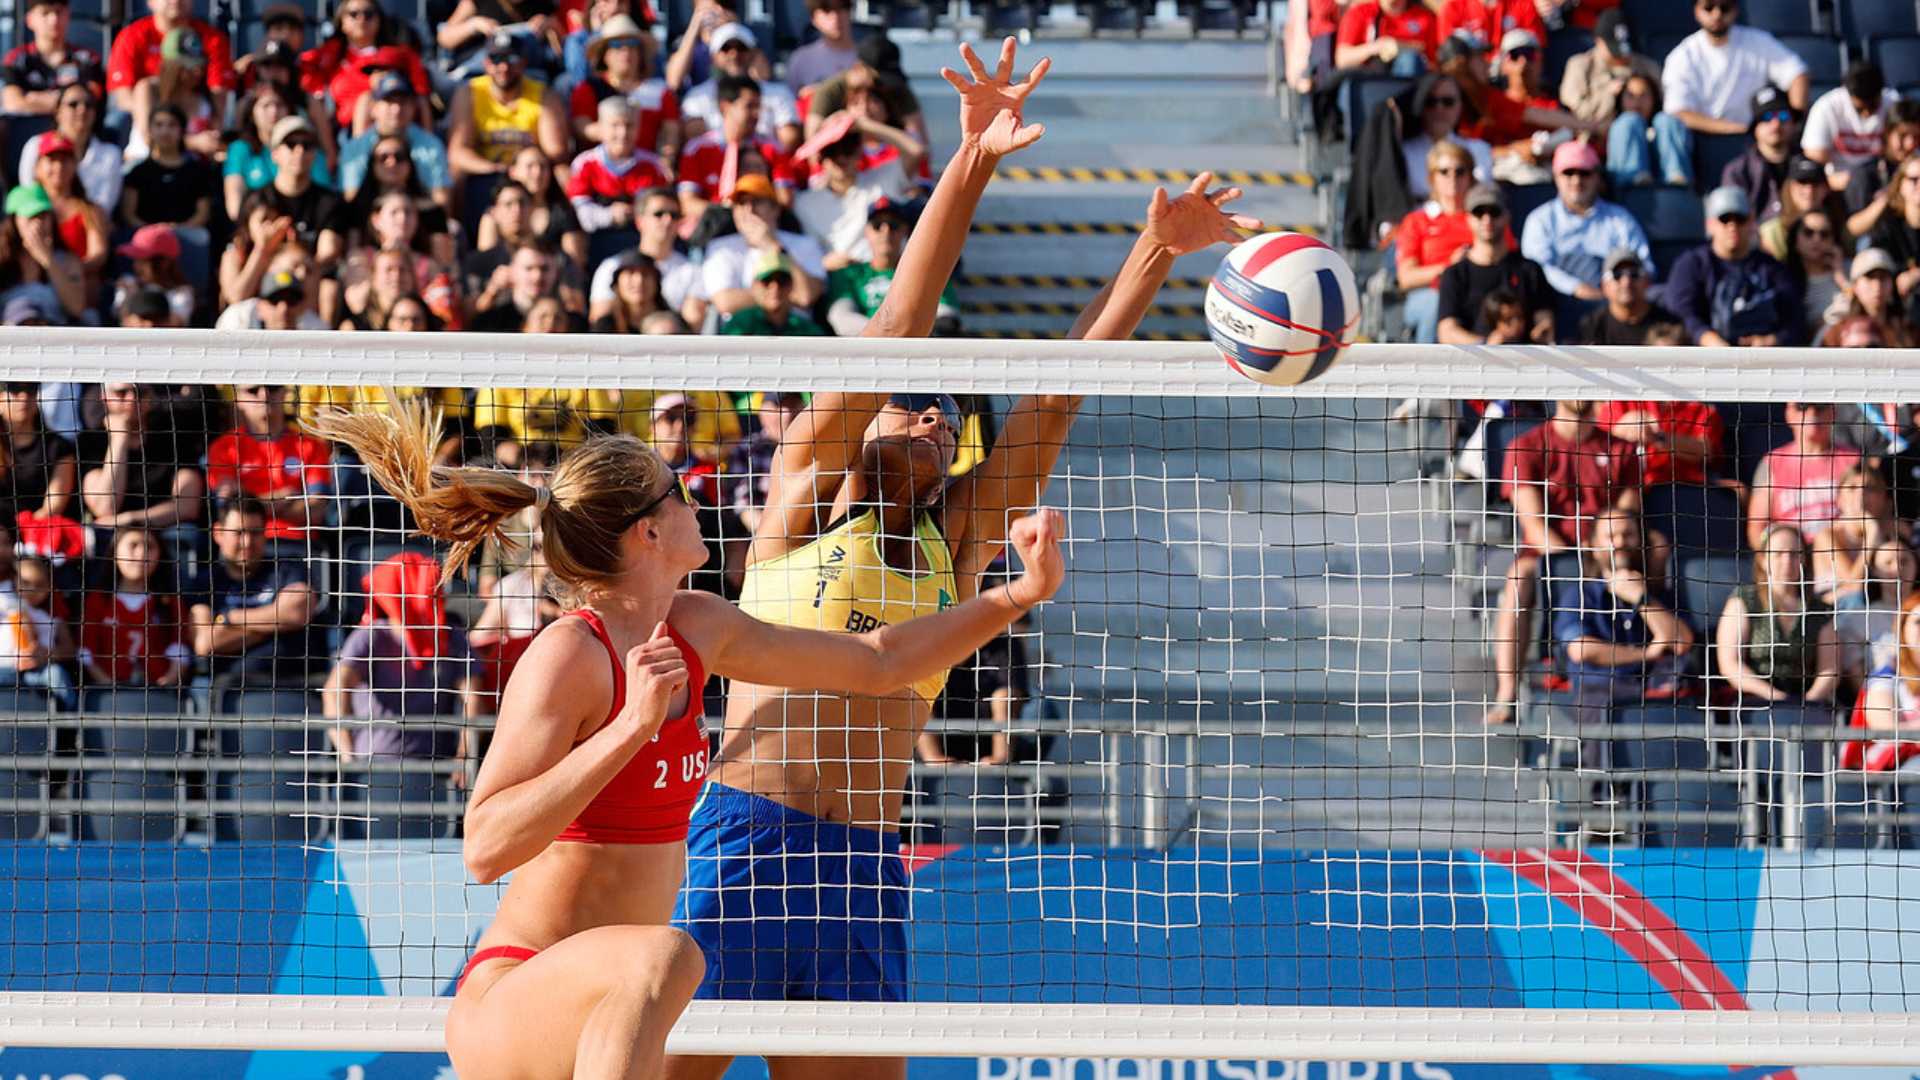 Brazil will face Canada in female beach volleyball's final